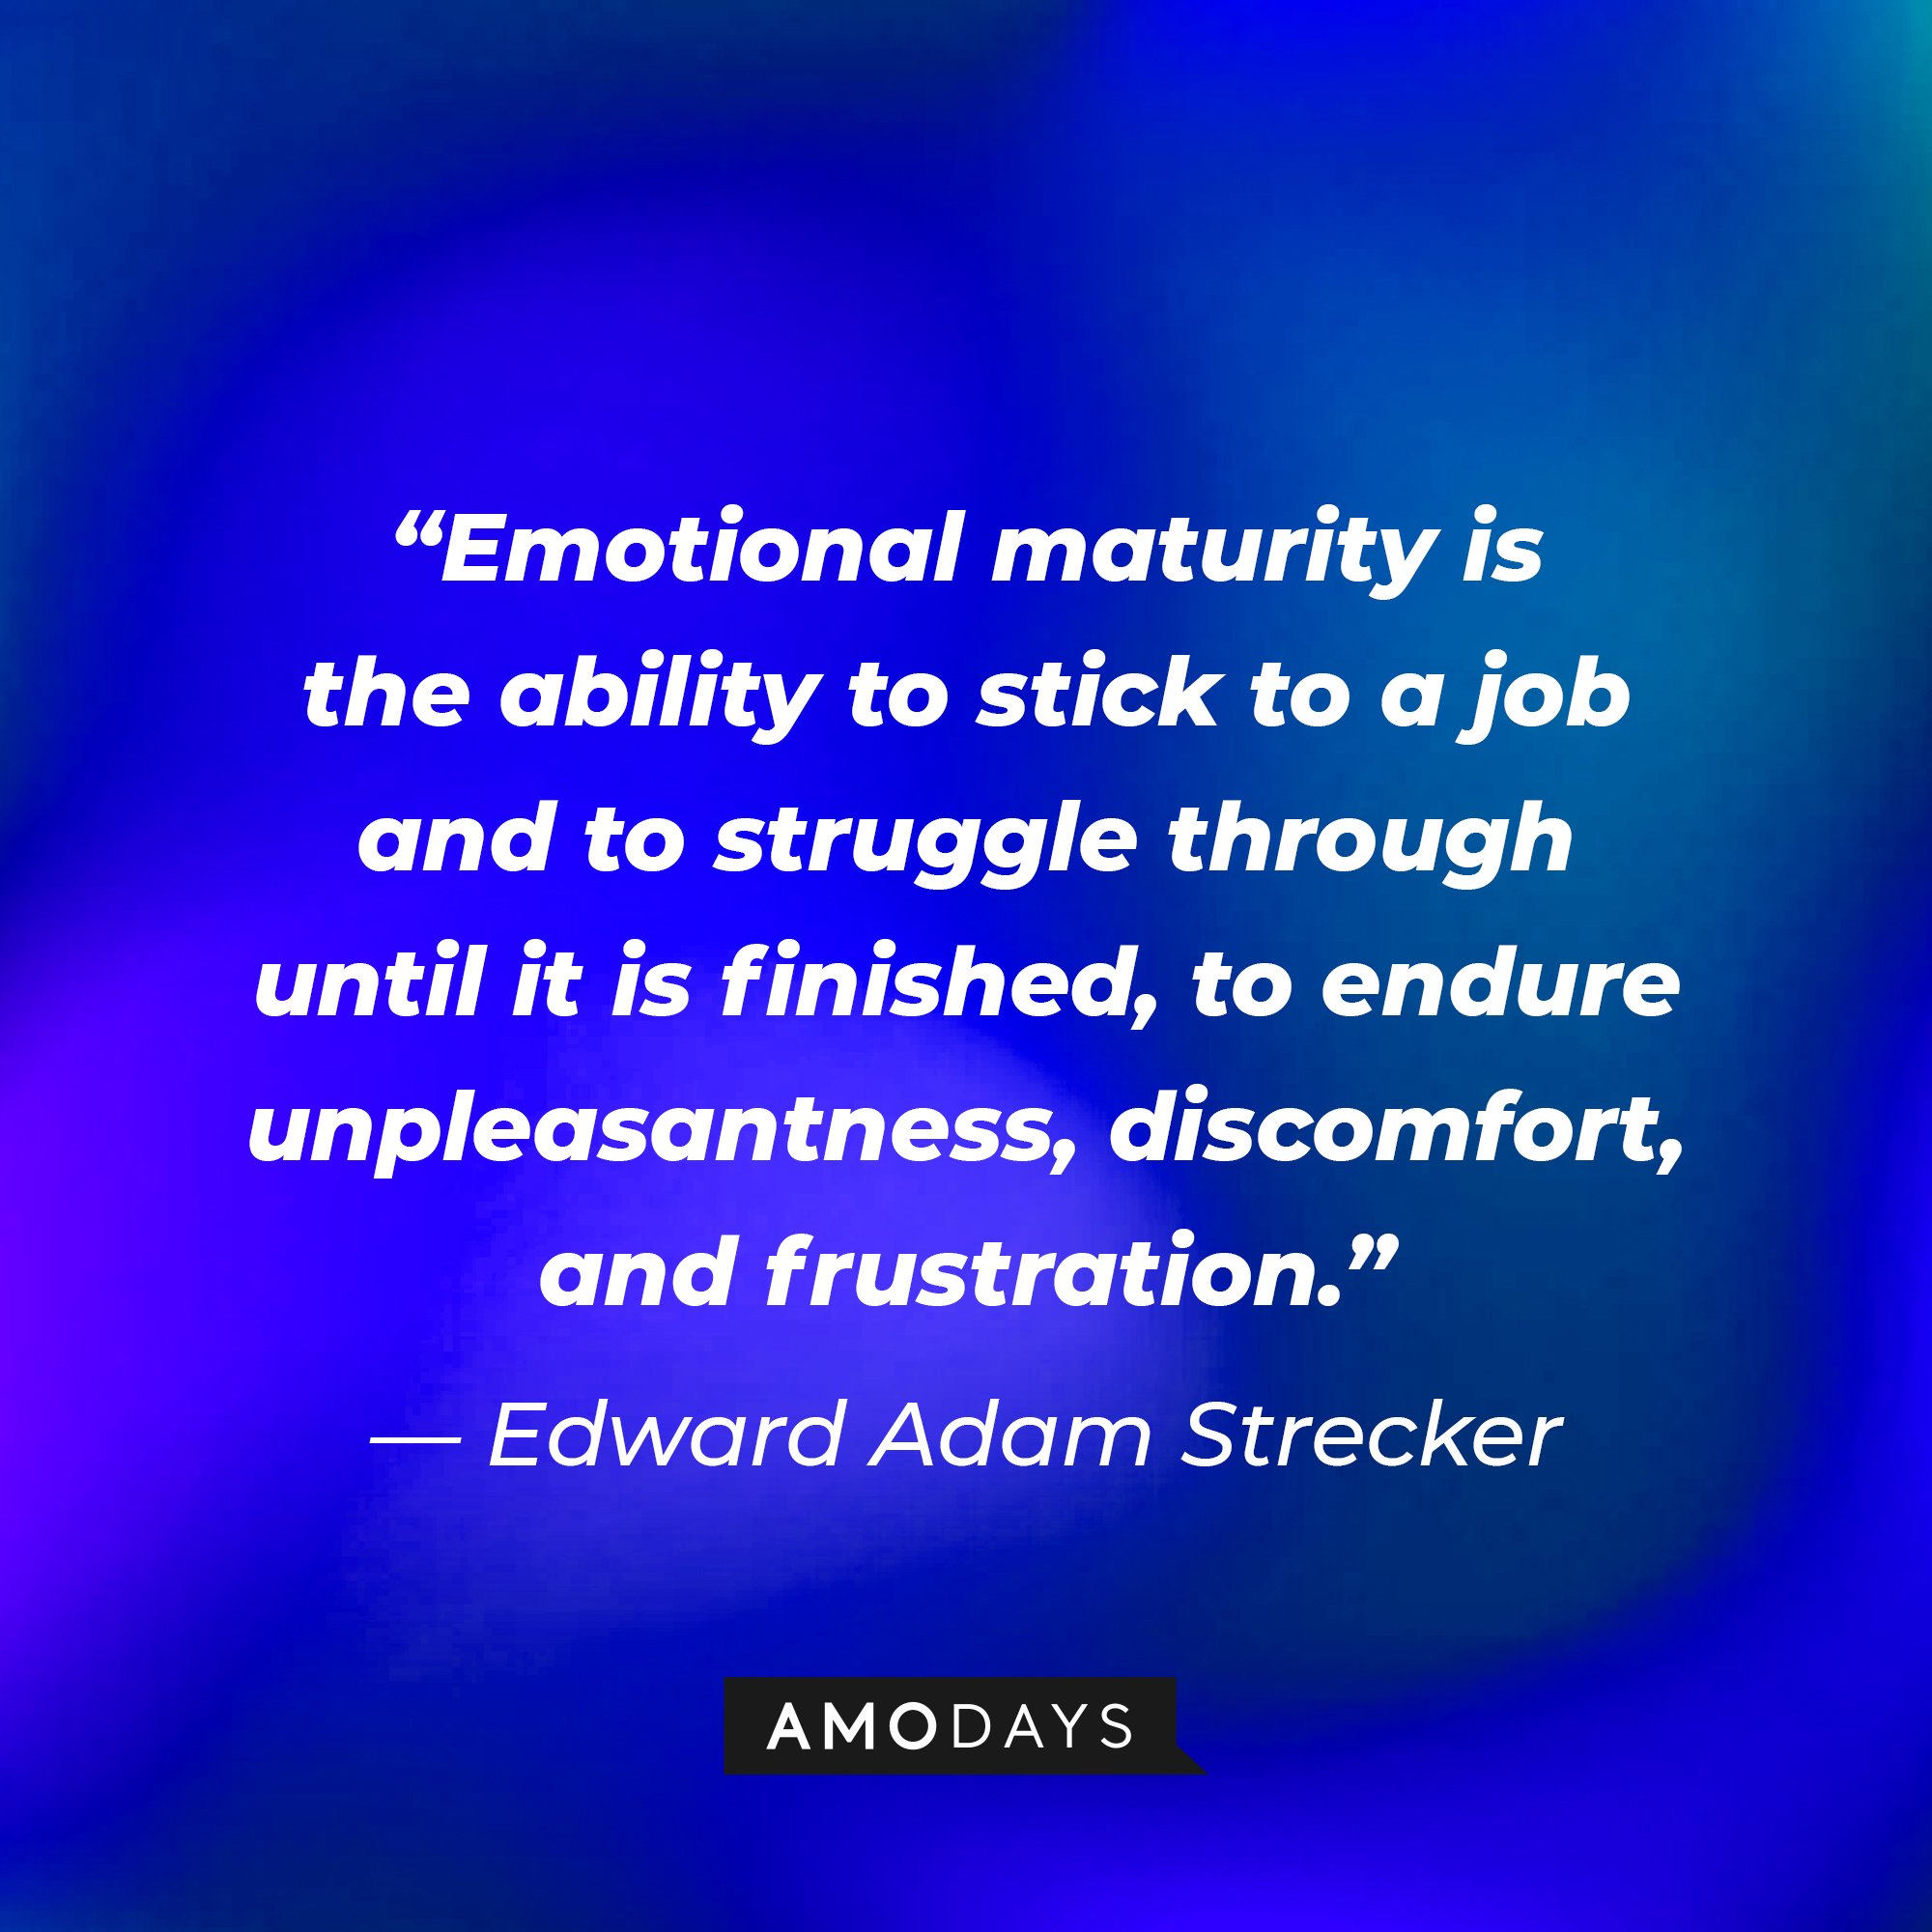 Edward Adam Strecker's quote: “Emotional maturity is the ability to stick to a job and to struggle through until it is finished, to endure unpleasantness, discomfort, and frustration.” | Image: AmoDays